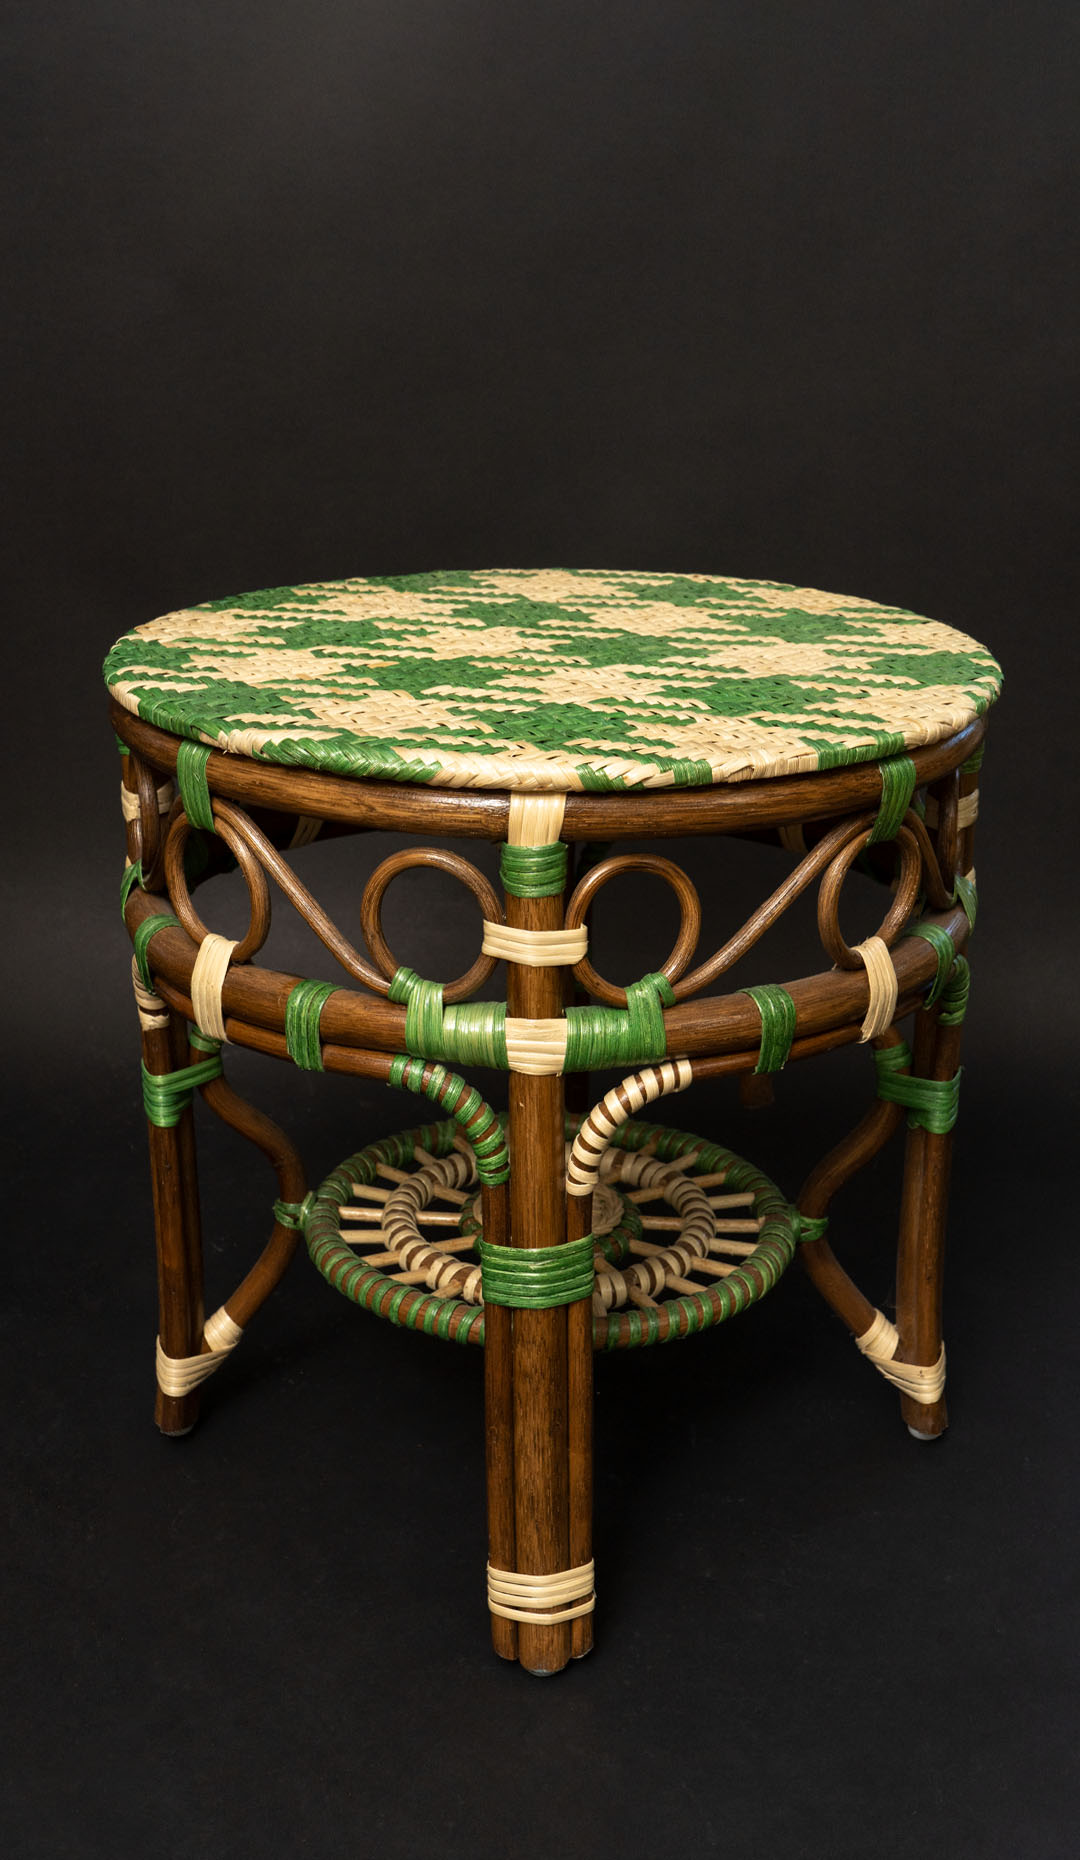 Green and Cream Rattan Houndstooth Side Table by Creel and Gow